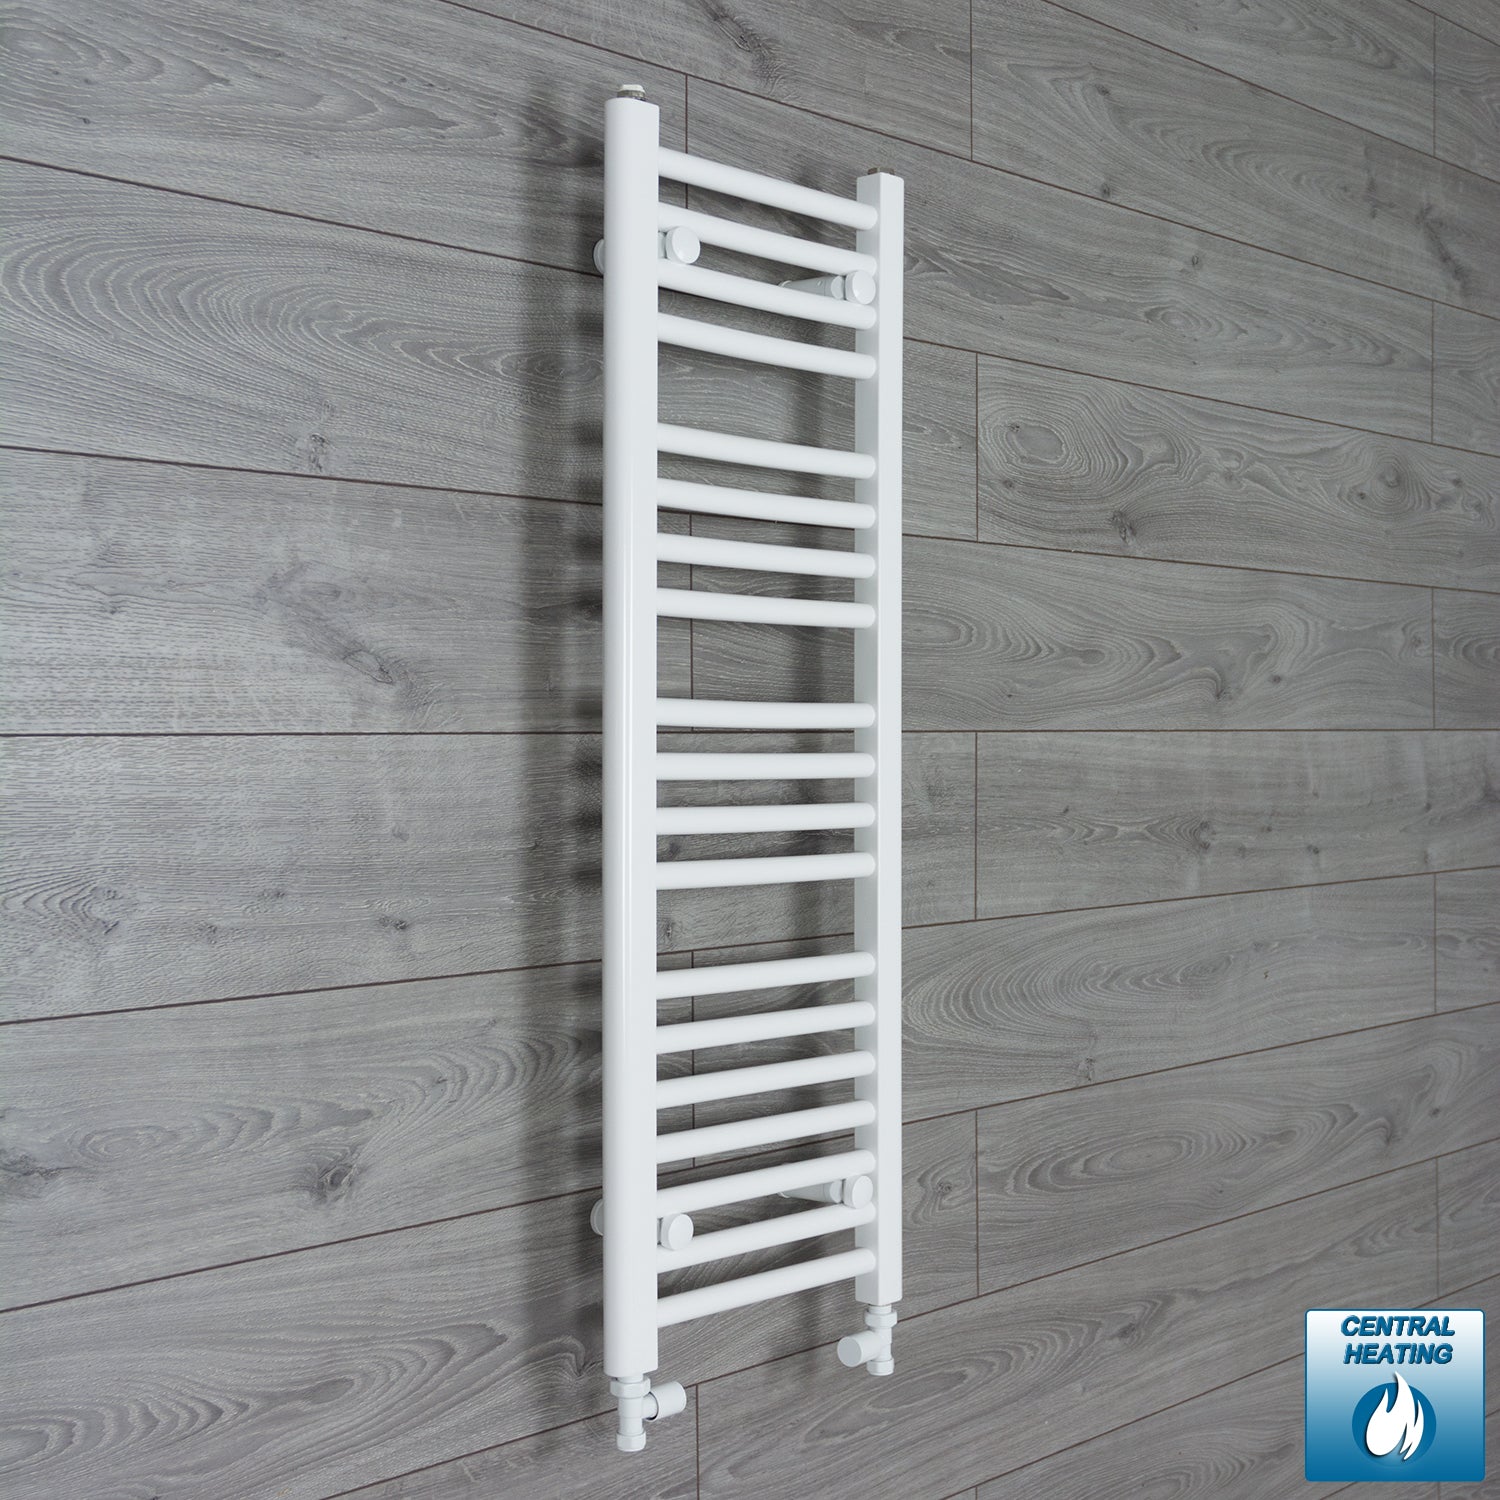 mm High 300 mm Wide White Towel Rail Central Heating